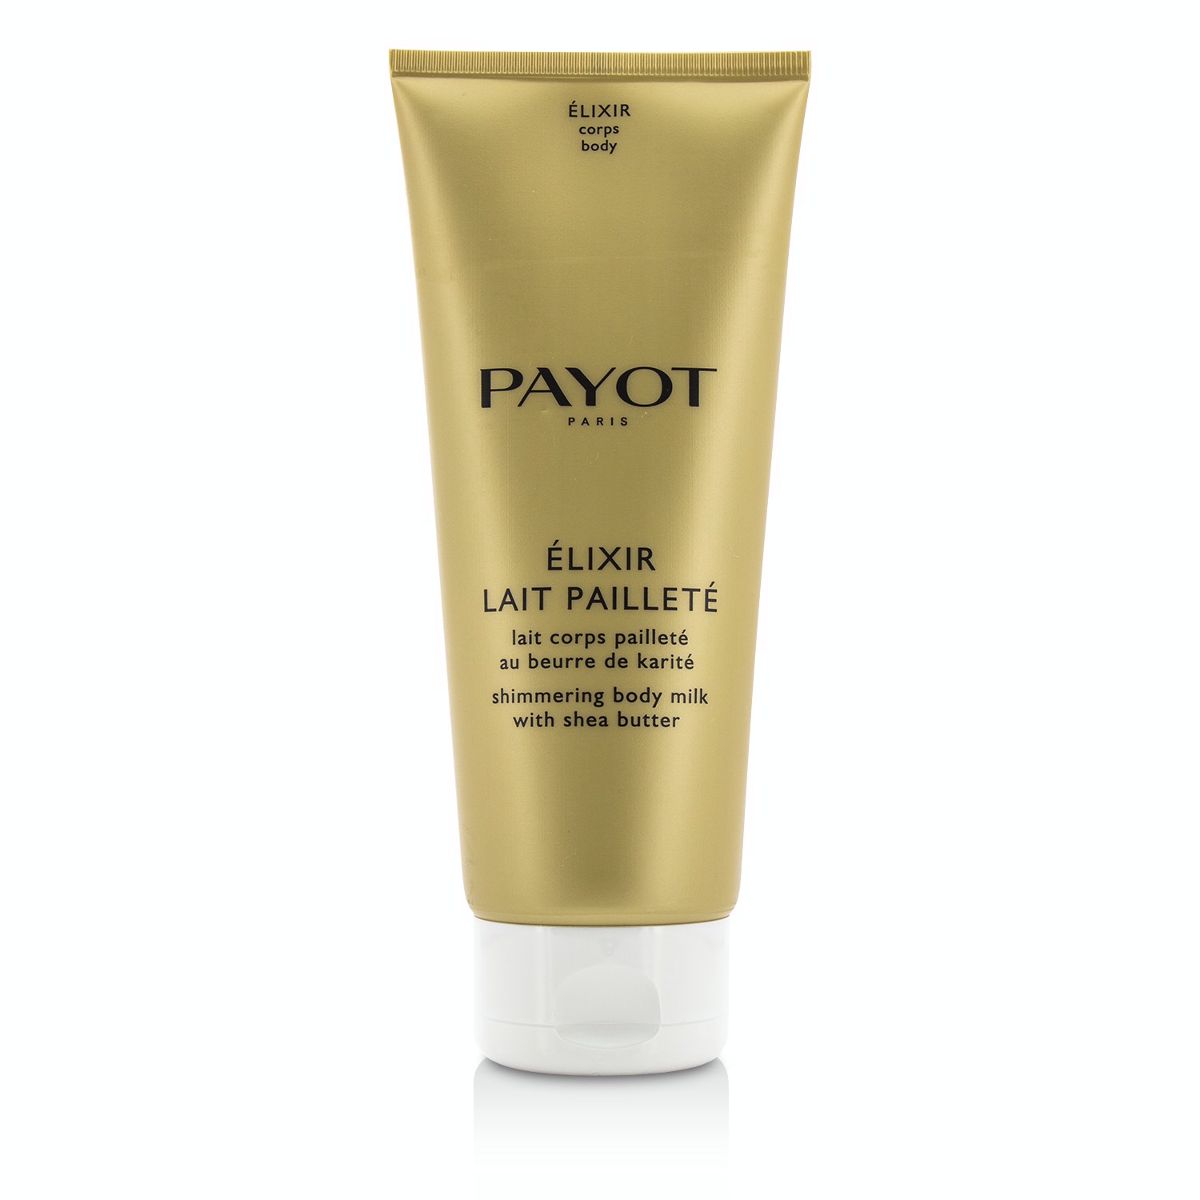 Elixir Lait Paillete Shimmering Body Milk With Shea Butter Payot Image